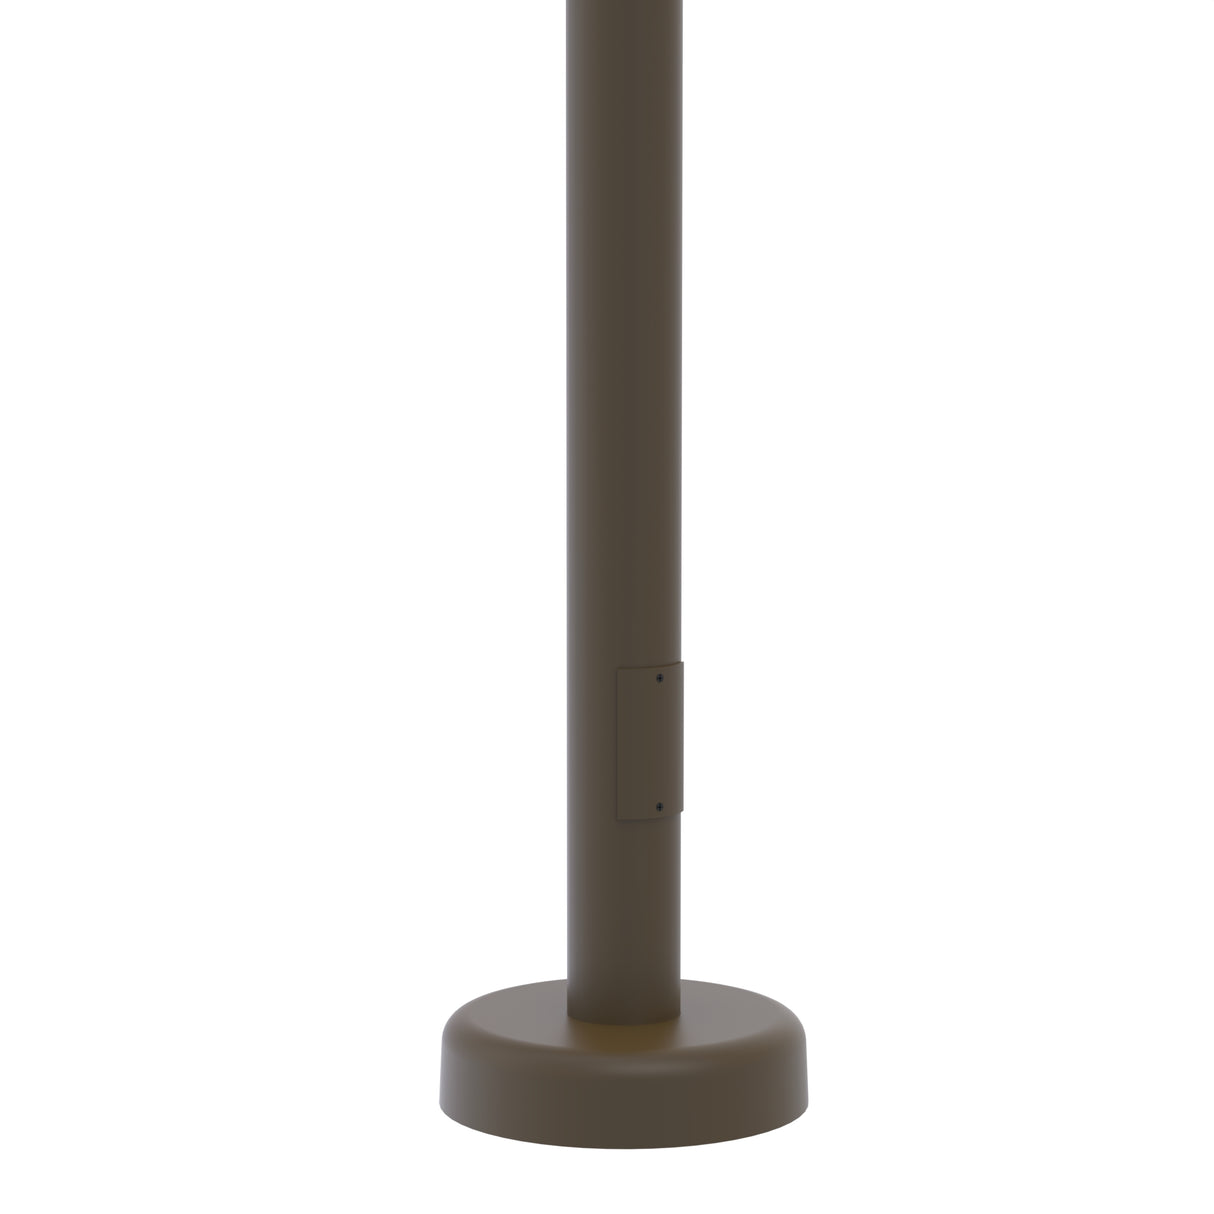 20' Tall x 5.0" Base OD x 3.0" Top OD x 0.125" Thick, Round Tapered Aluminum, Hinged Anchor Base Light Pole